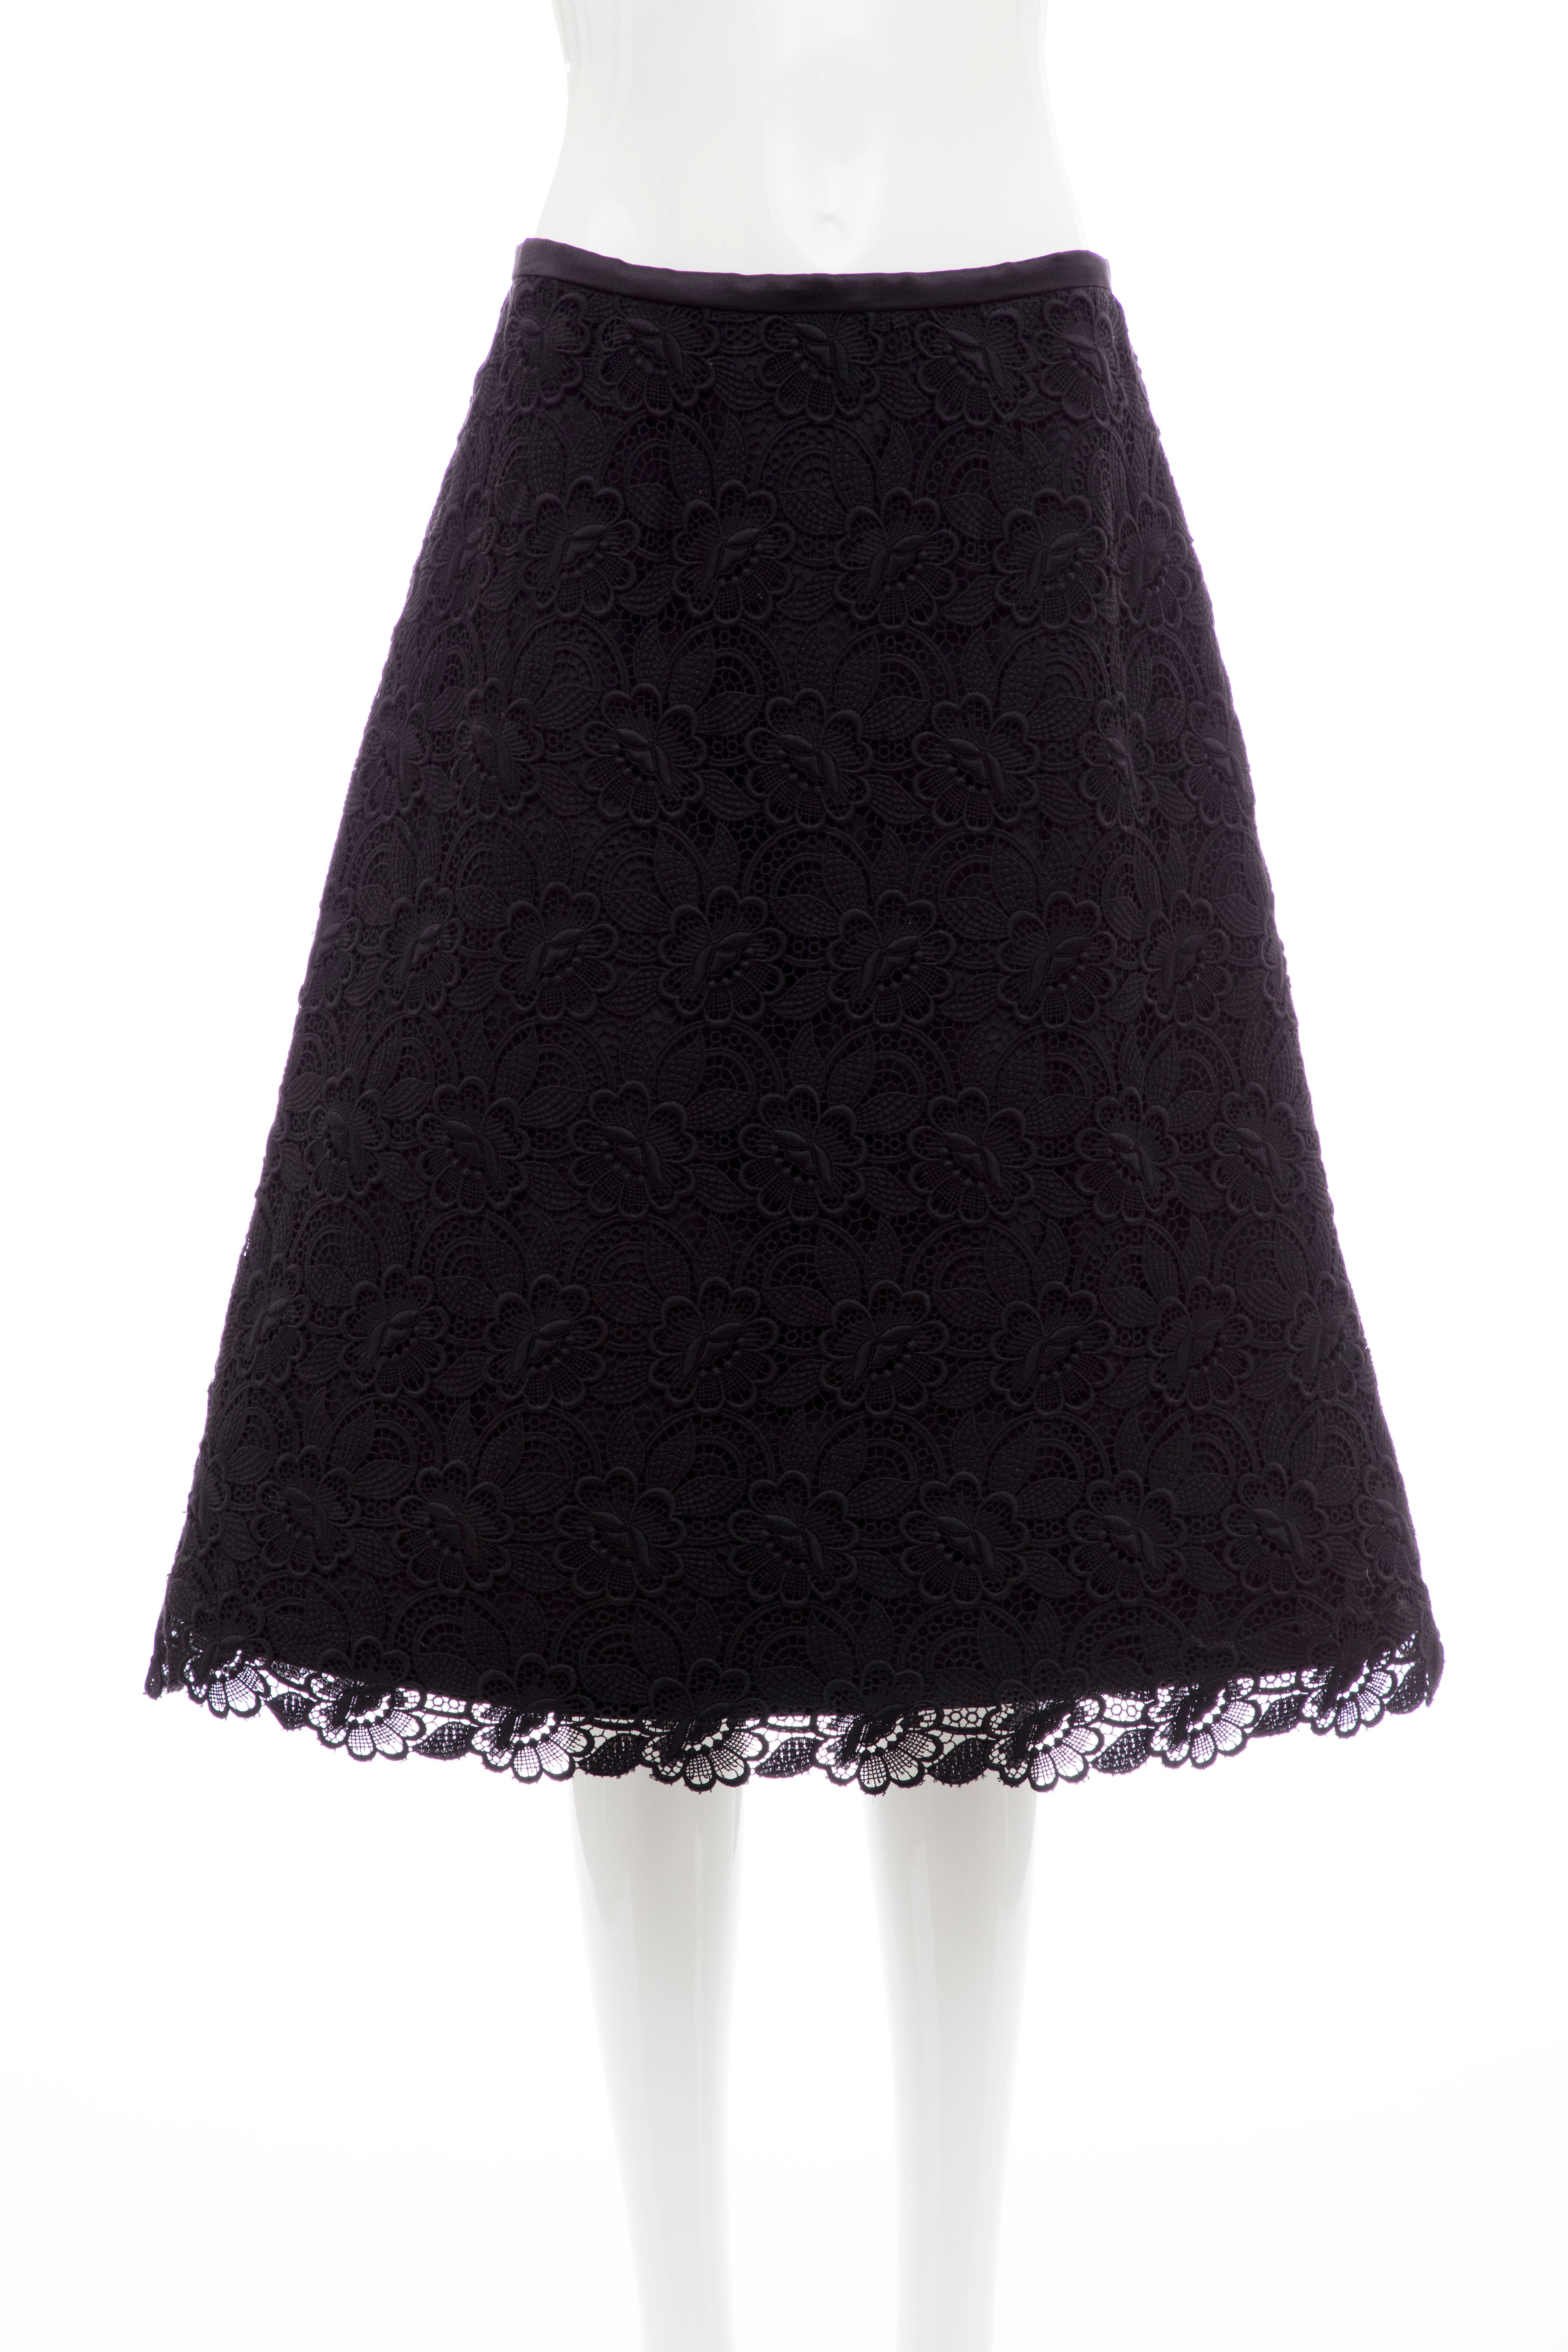 Alexander McQueen Black Silk Cotton Guipure Lace Evening Skirt, Fall 2006 In New Condition For Sale In Cincinnati, OH